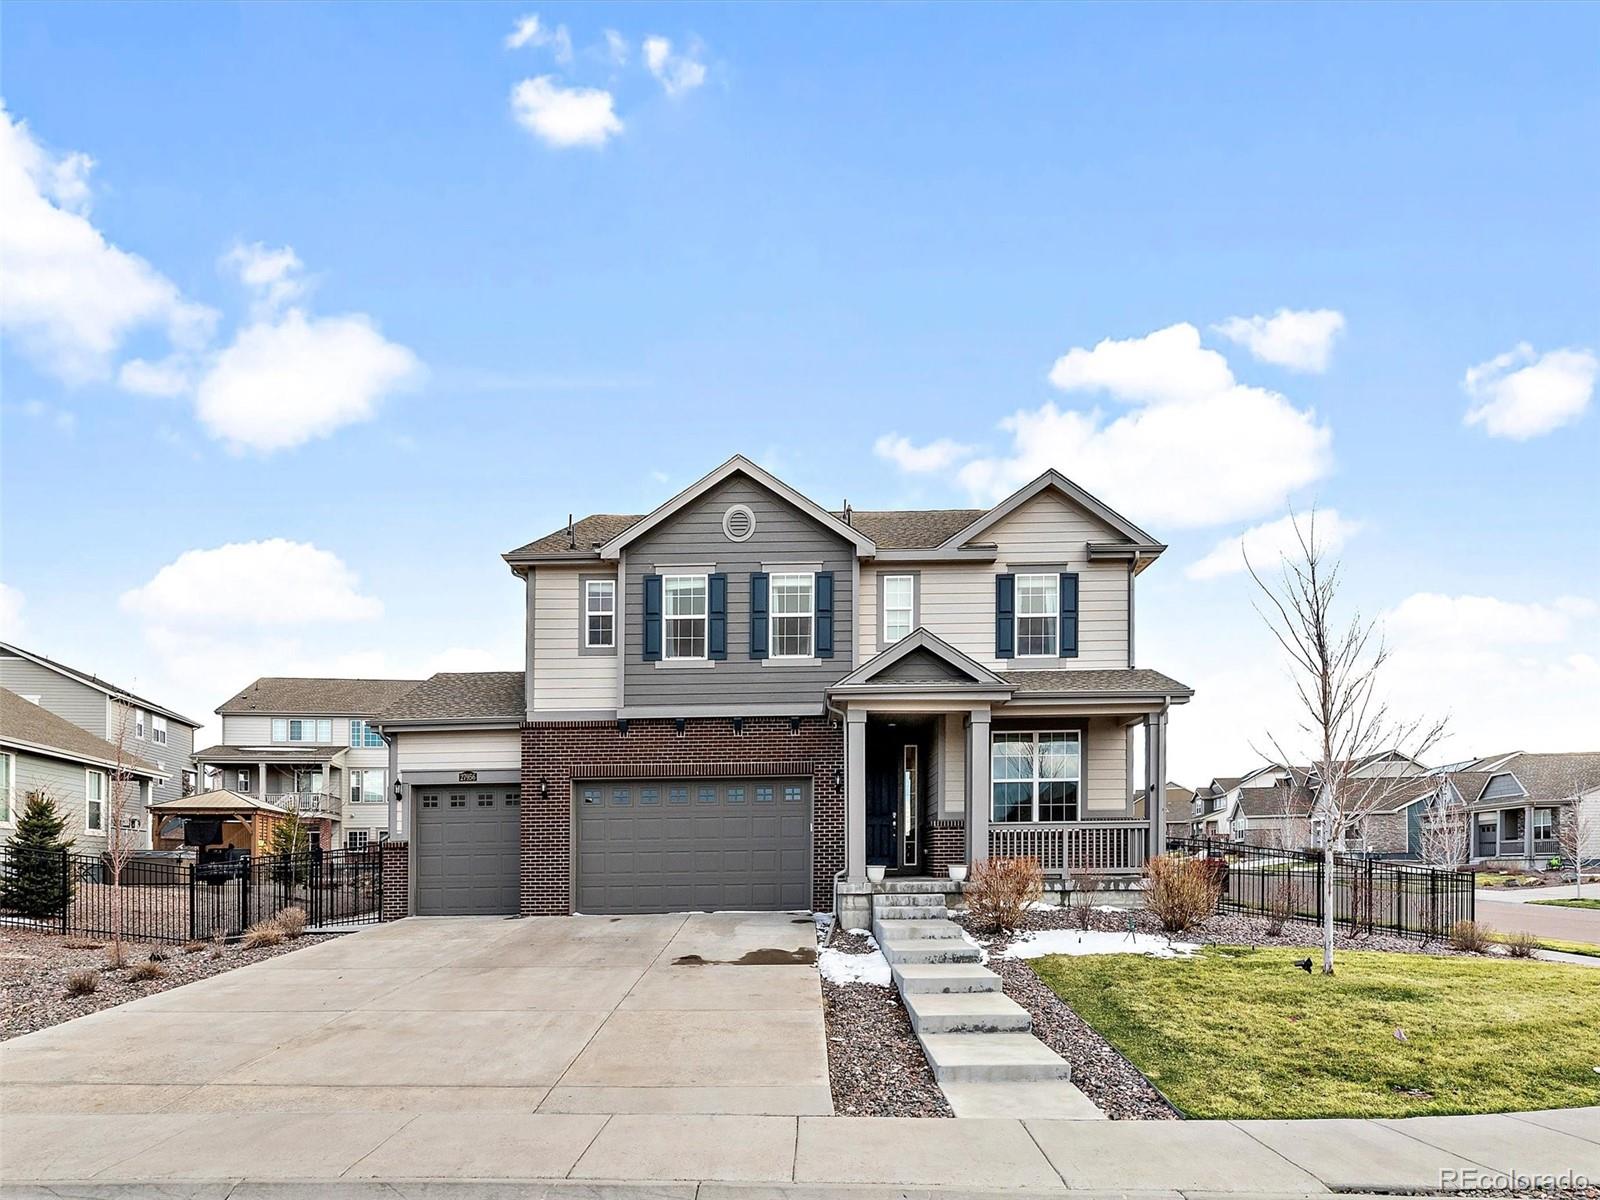 27956 e nichols place, aurora sold home. Closed on 2024-04-30 for $855,000.